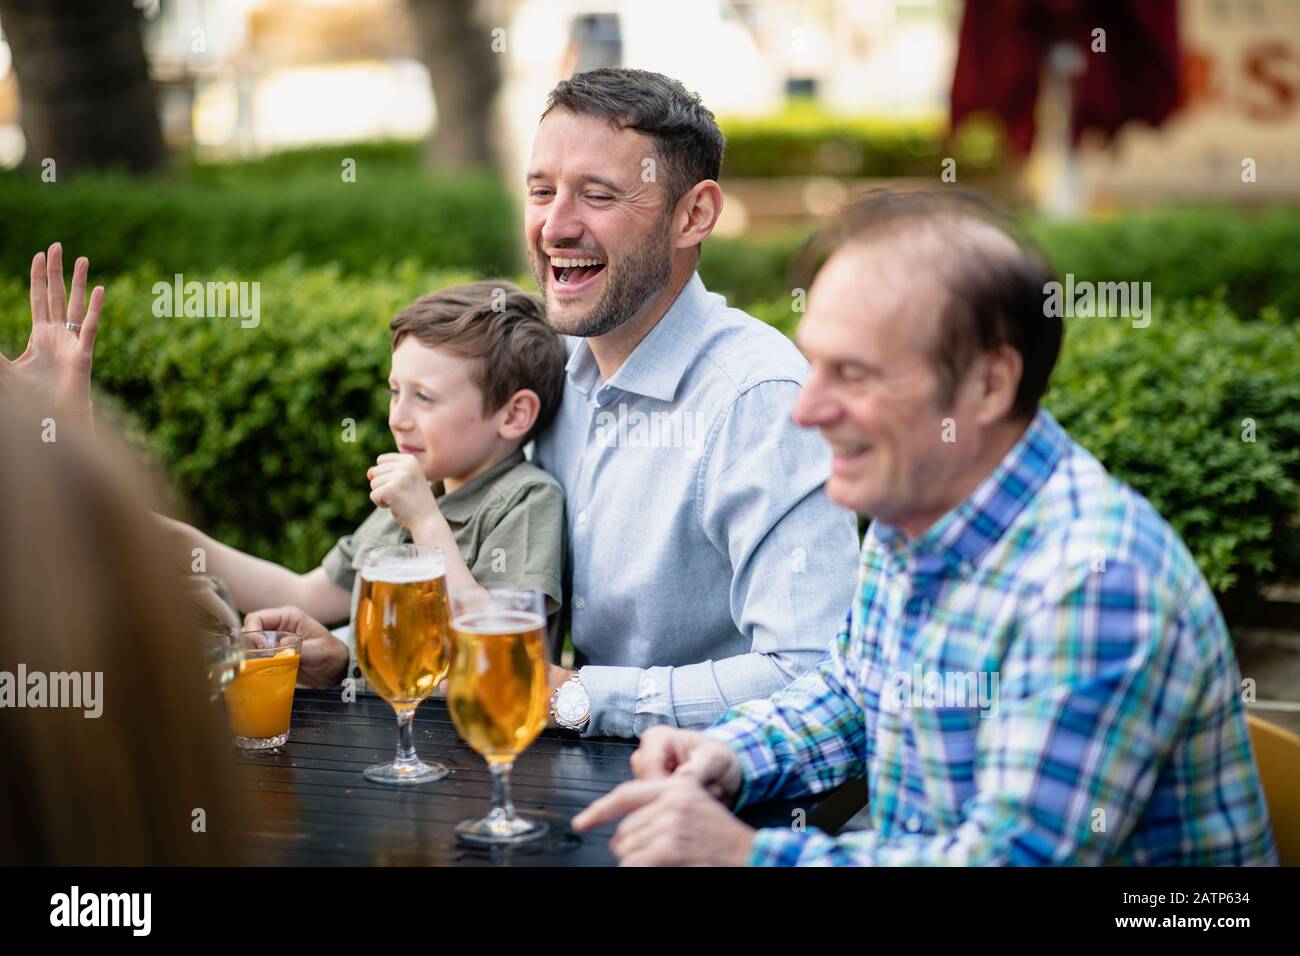 A multi-generation family having a drink together outdoors at a bar. Stock Photo